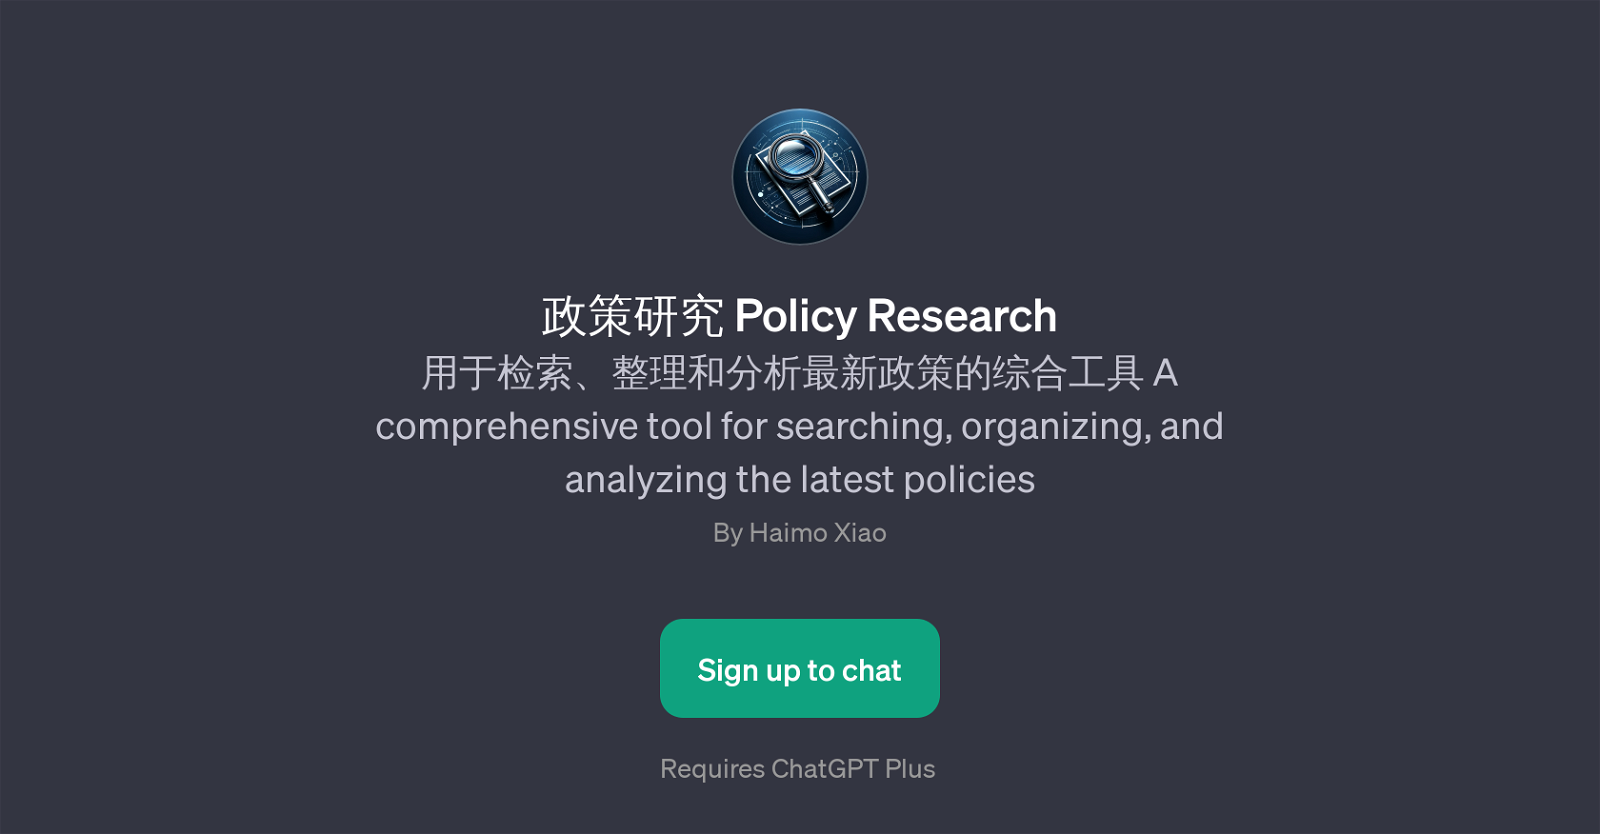 Policy Research website